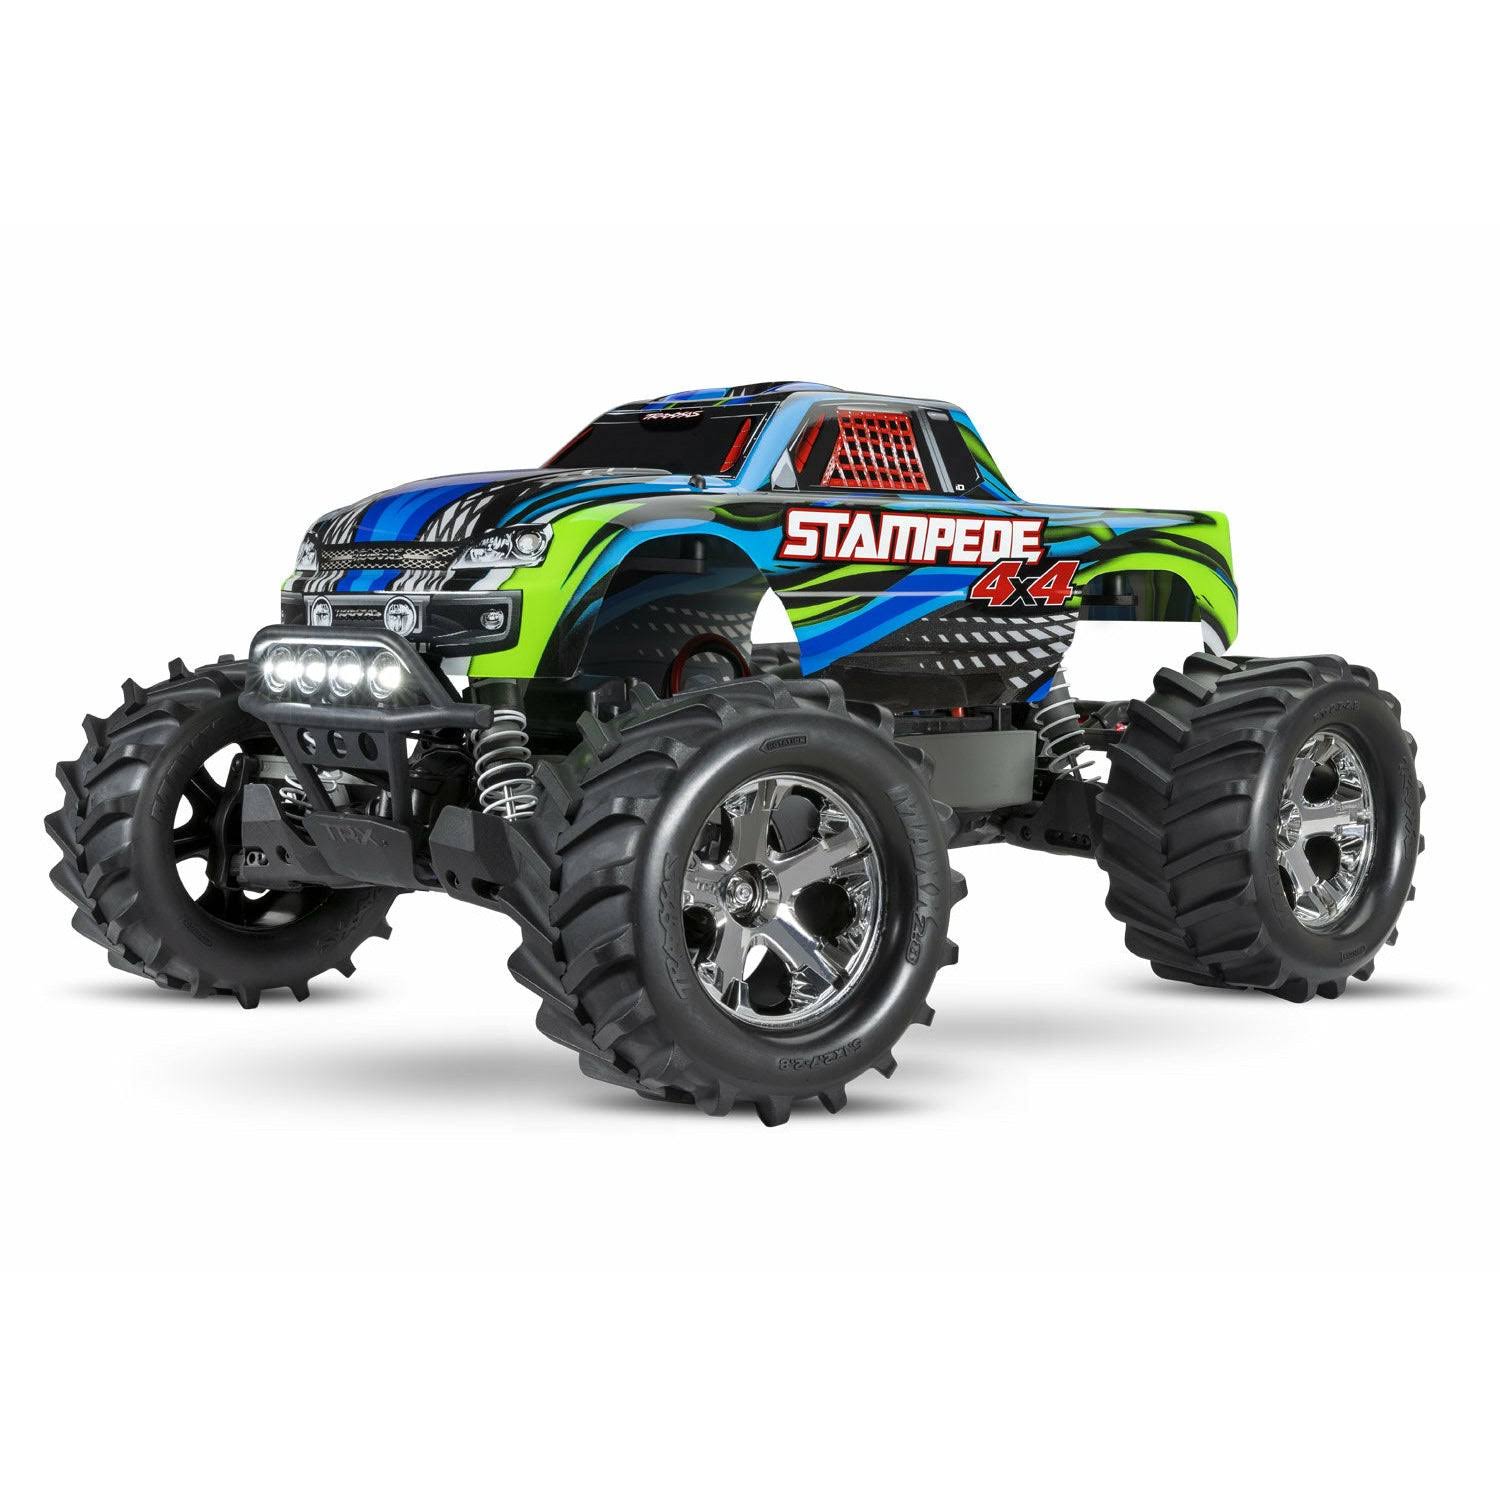 Traxxas Stampede 4X4 brushed Titan 12t motor and XL-5 Battery & Charger & LED Blue